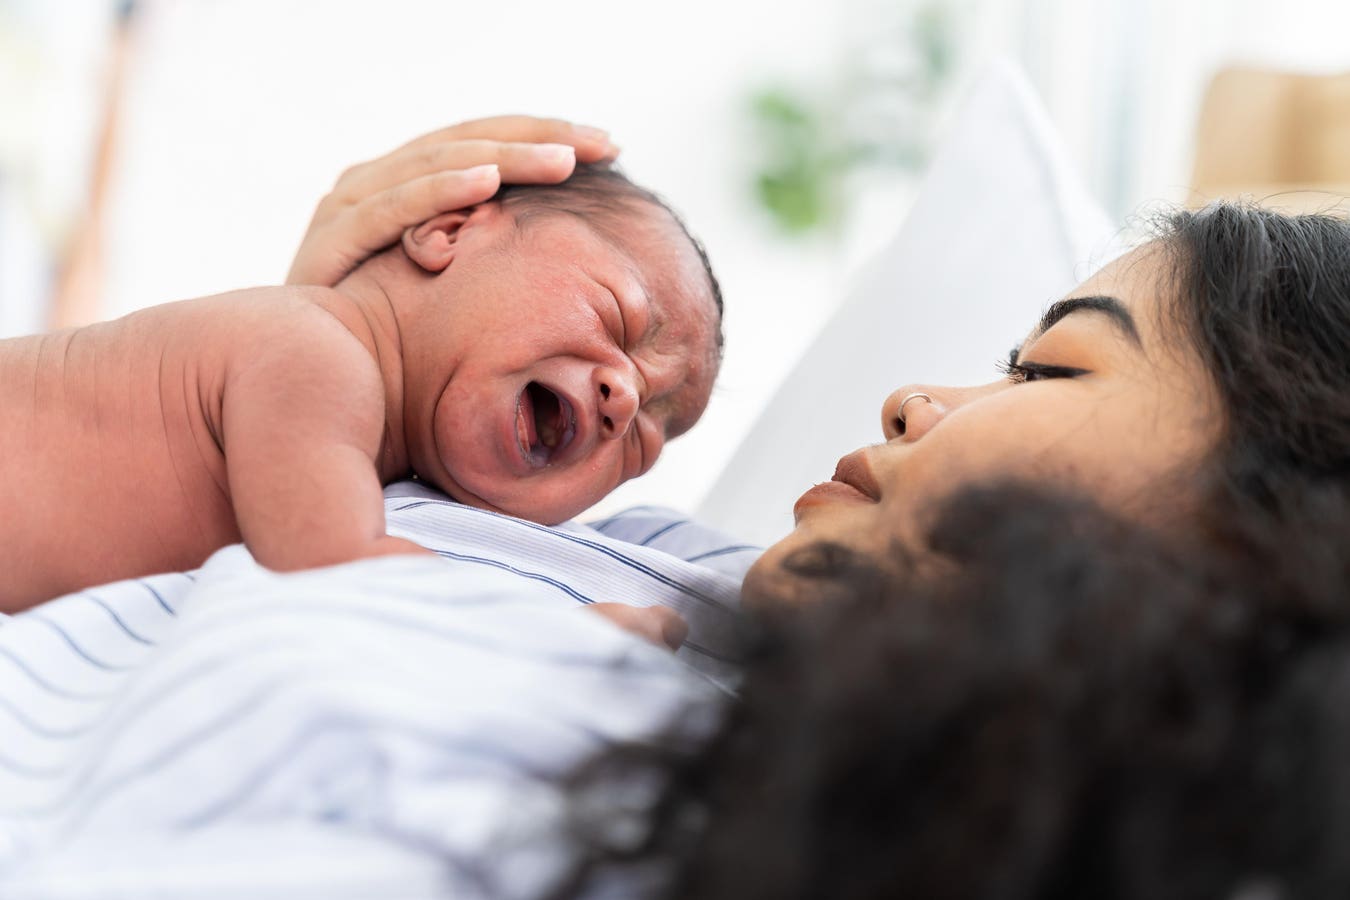 Health Body ‘Deeply Concerned’ By Racism On England’s Maternity Wards